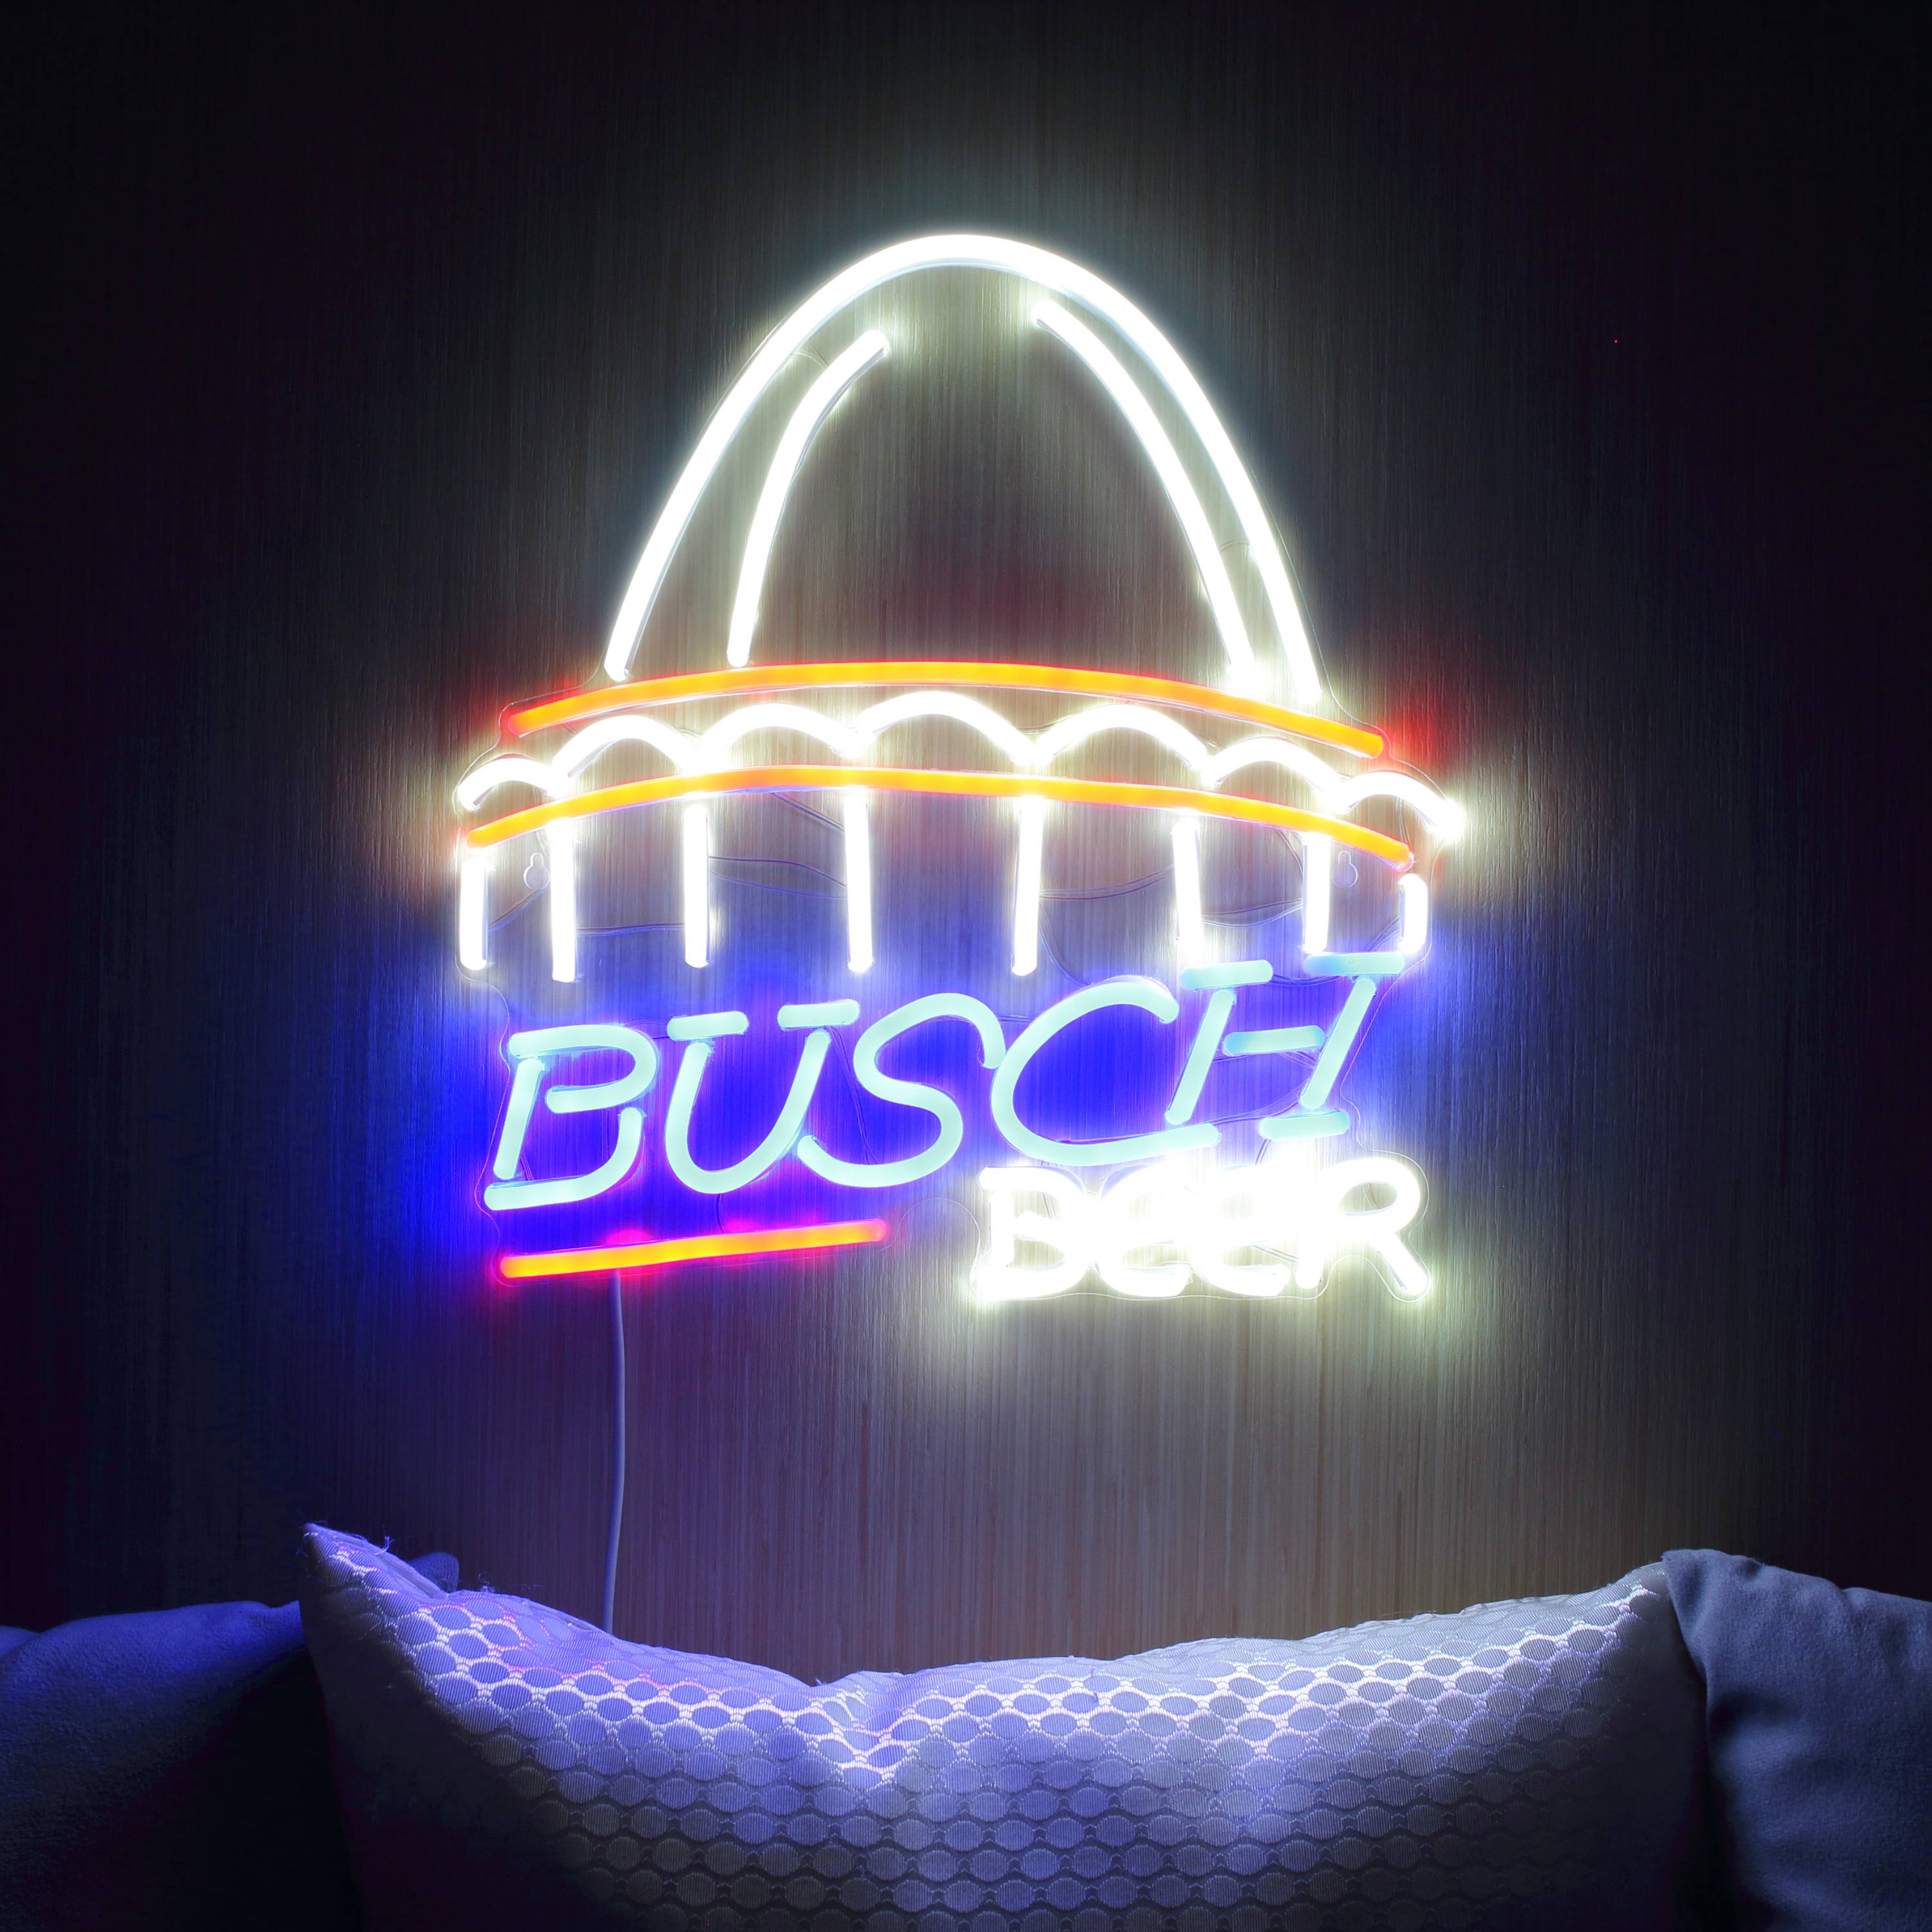 Busch Beer Circus Large Flex Neon LED Sign